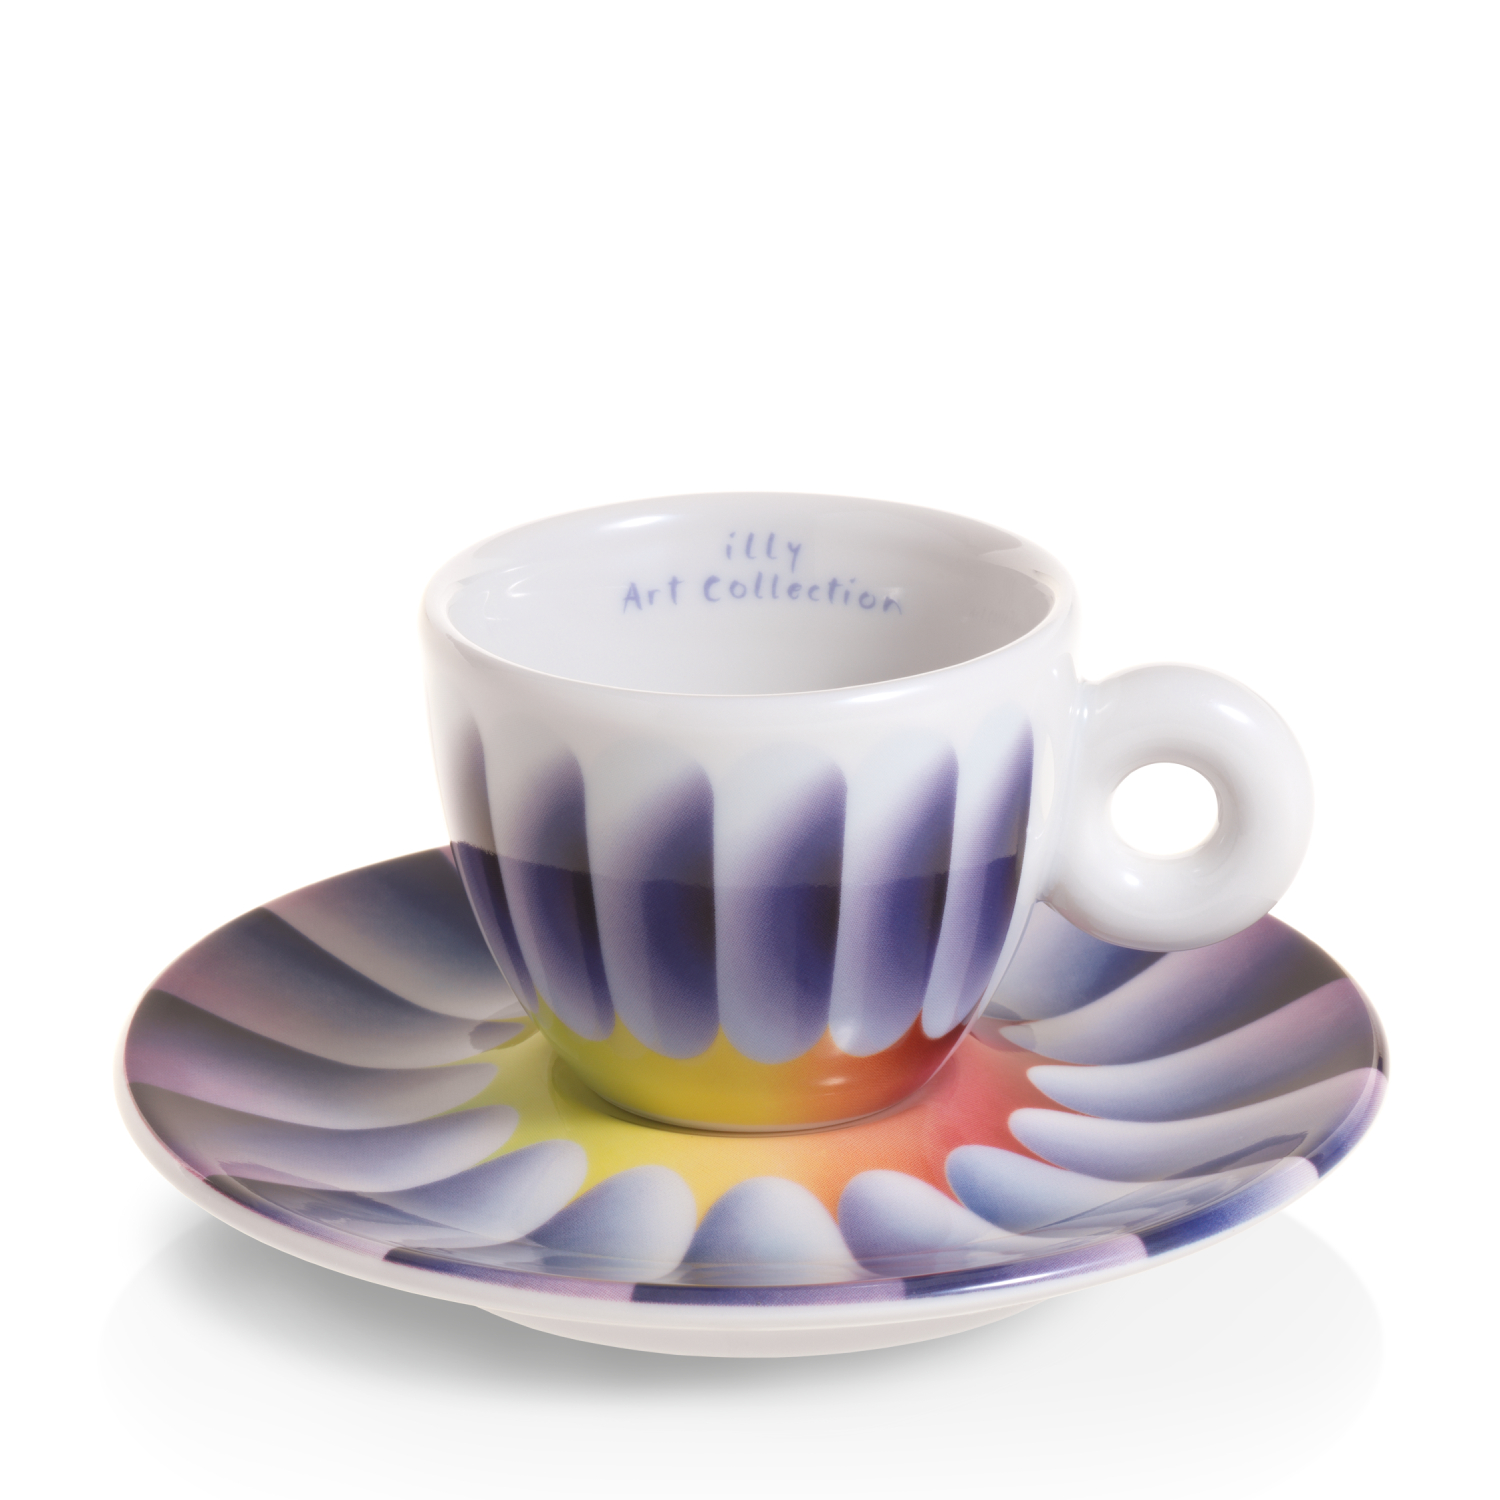 illy Art Collection JUDY CHICAGO Gift Set 2 Espresso Cups, Cups, 02-02-2015